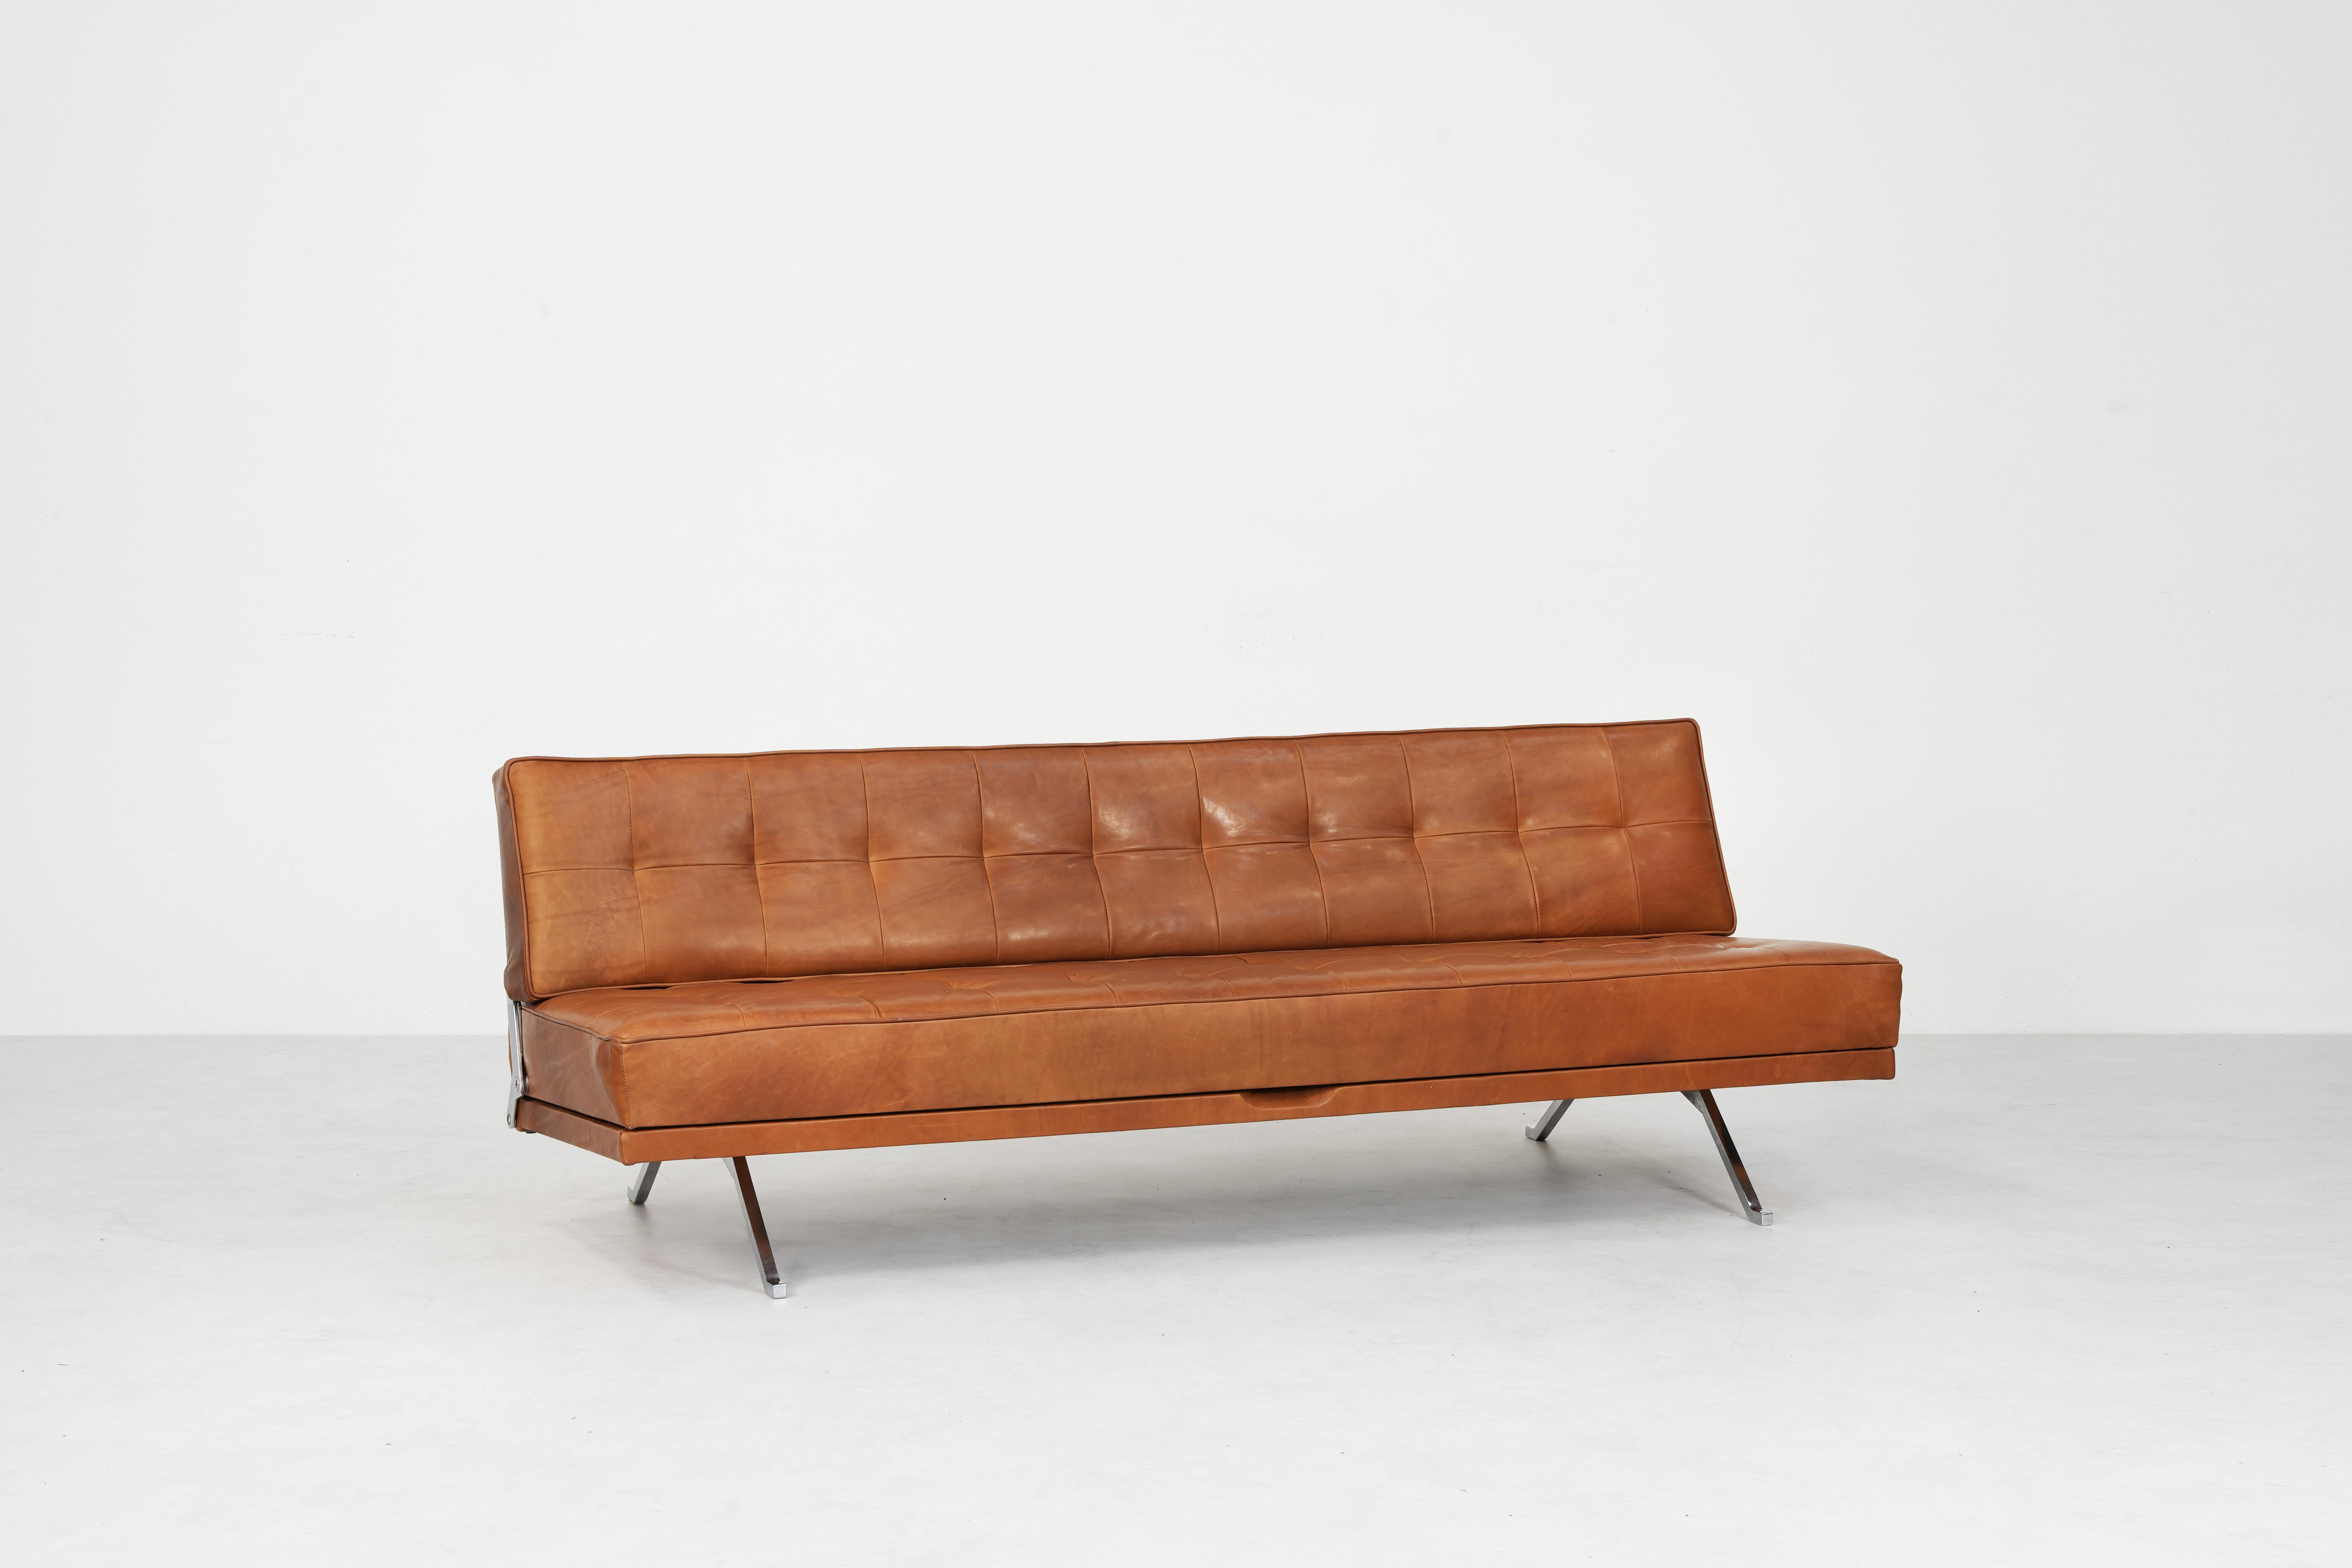 Sofa Daybed Constanze by Johannes Spalt for Wittmann, Austria 1960ies In Excellent Condition For Sale In Berlin, DE